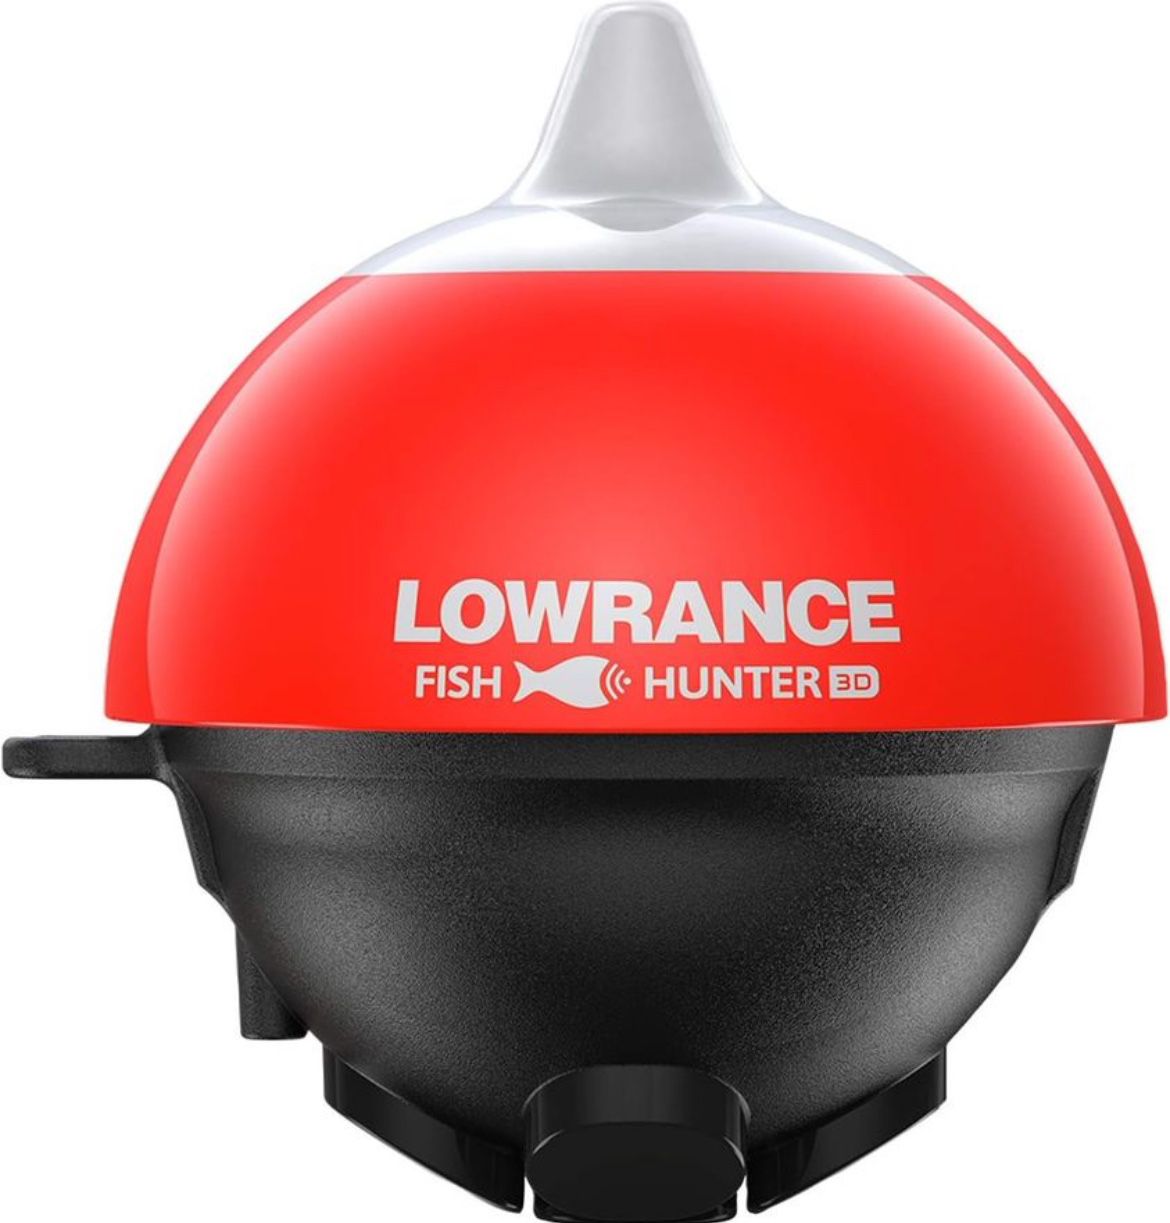 Lowrance FishHunter 3D - Portable Fish Finder Connects via WiFi to iOS and Android Devices